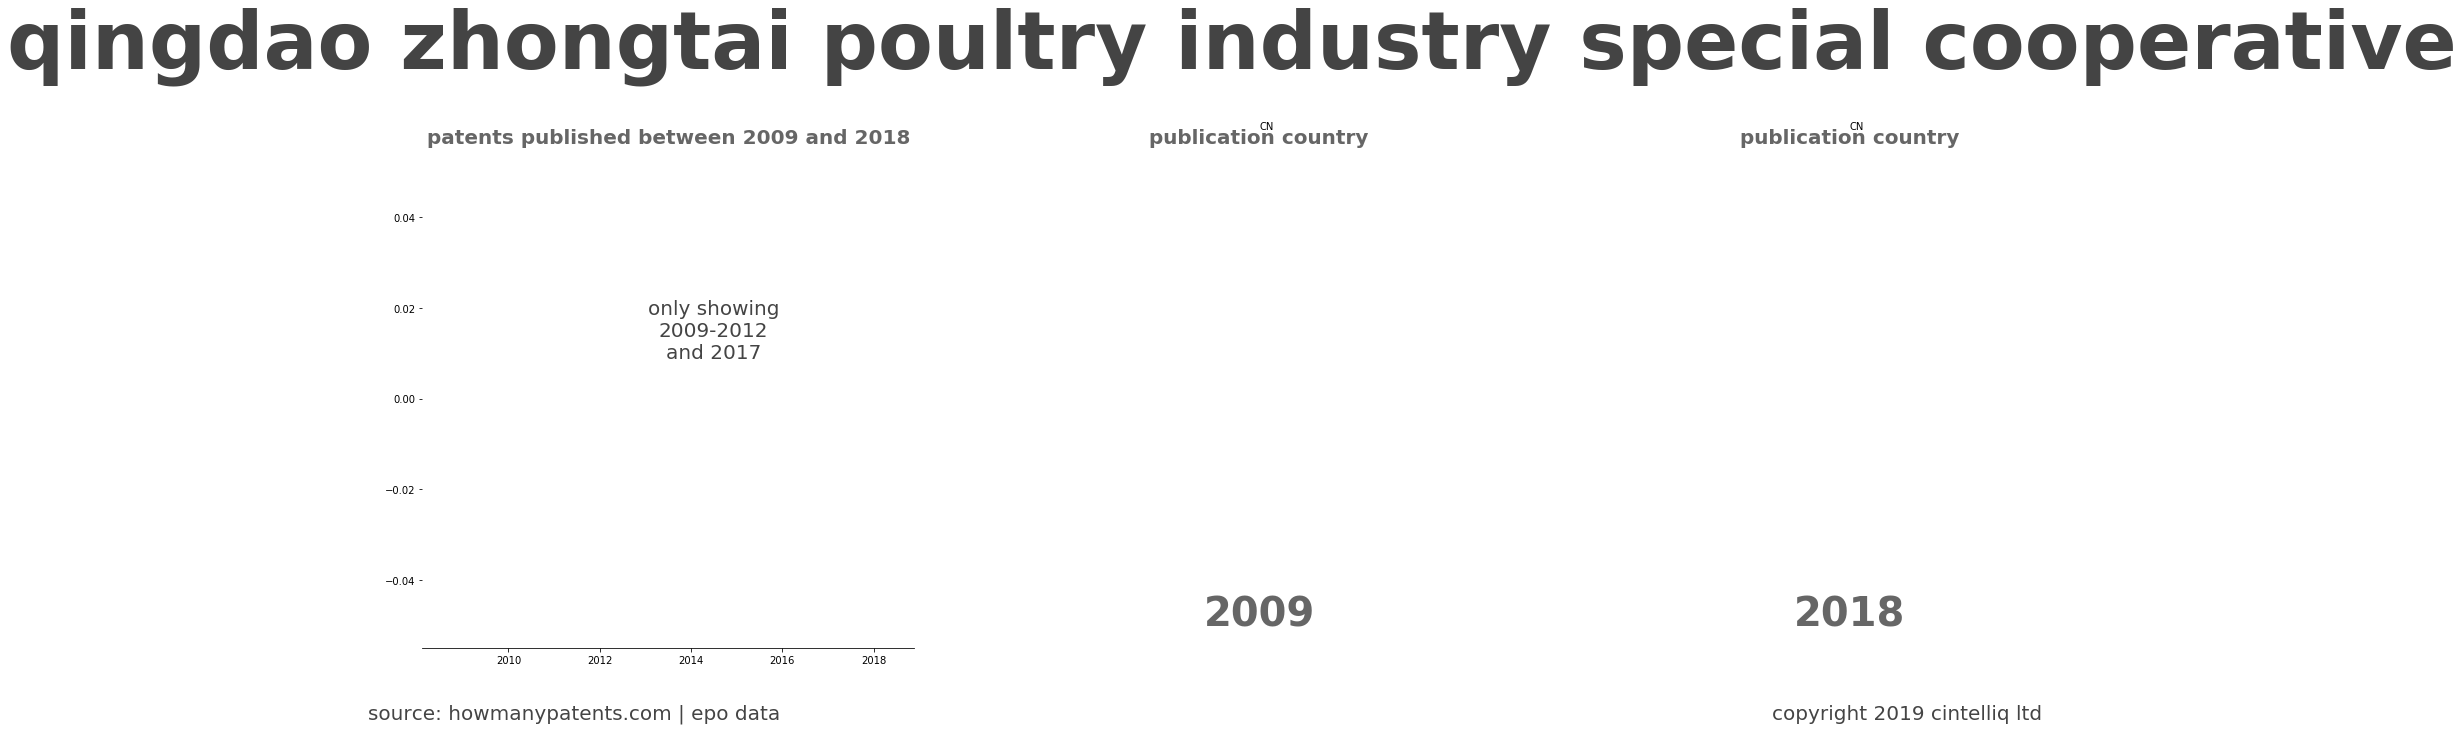 summary of patents for Qingdao Zhongtai Poultry Industry Special Cooperative